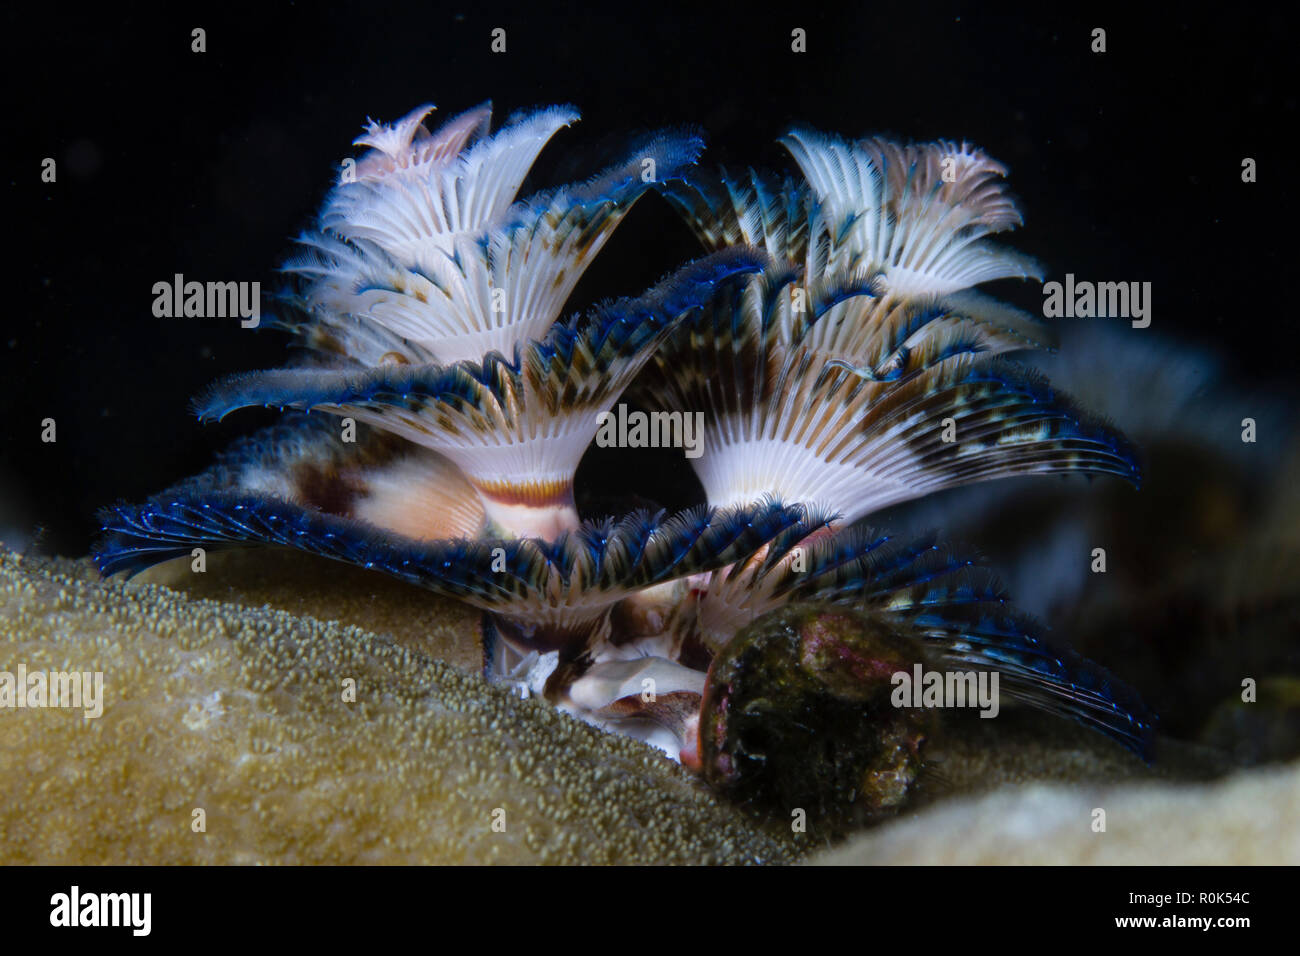 The tail of a Christmas tree worms fully open, Anilao, Philippines. Stock Photo